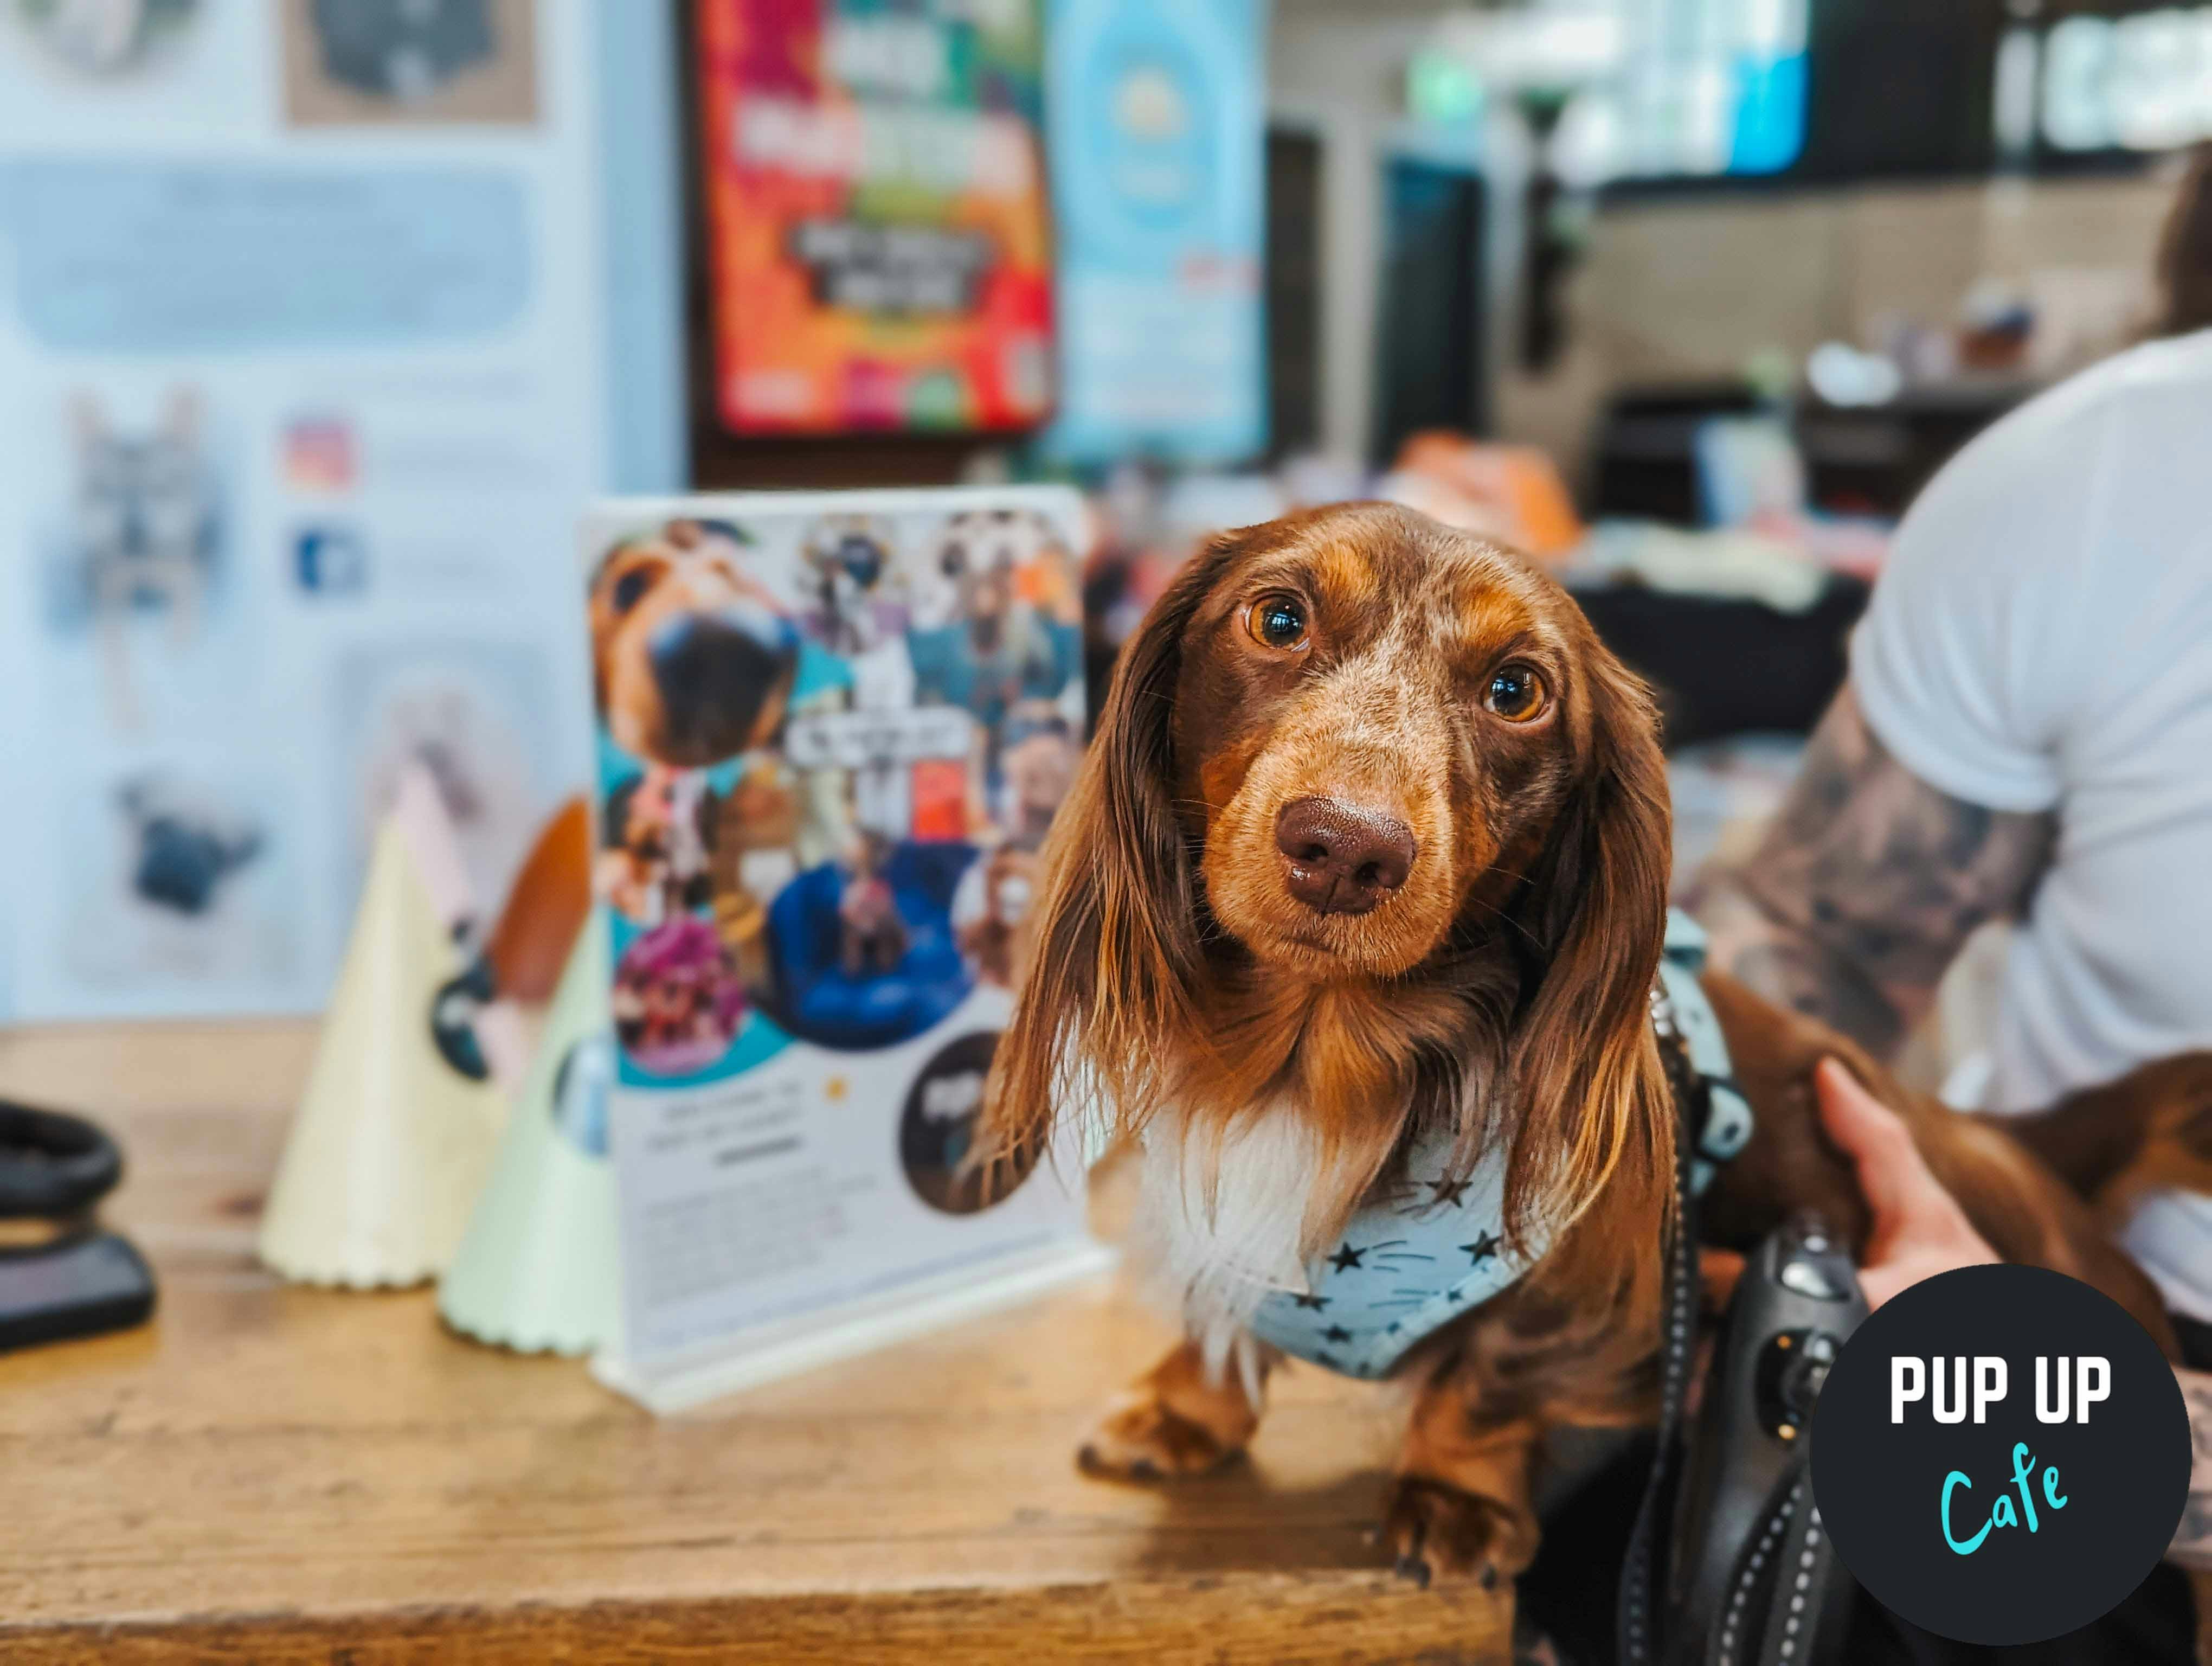 Dachshund Pup Up Cafe – Huddersfield